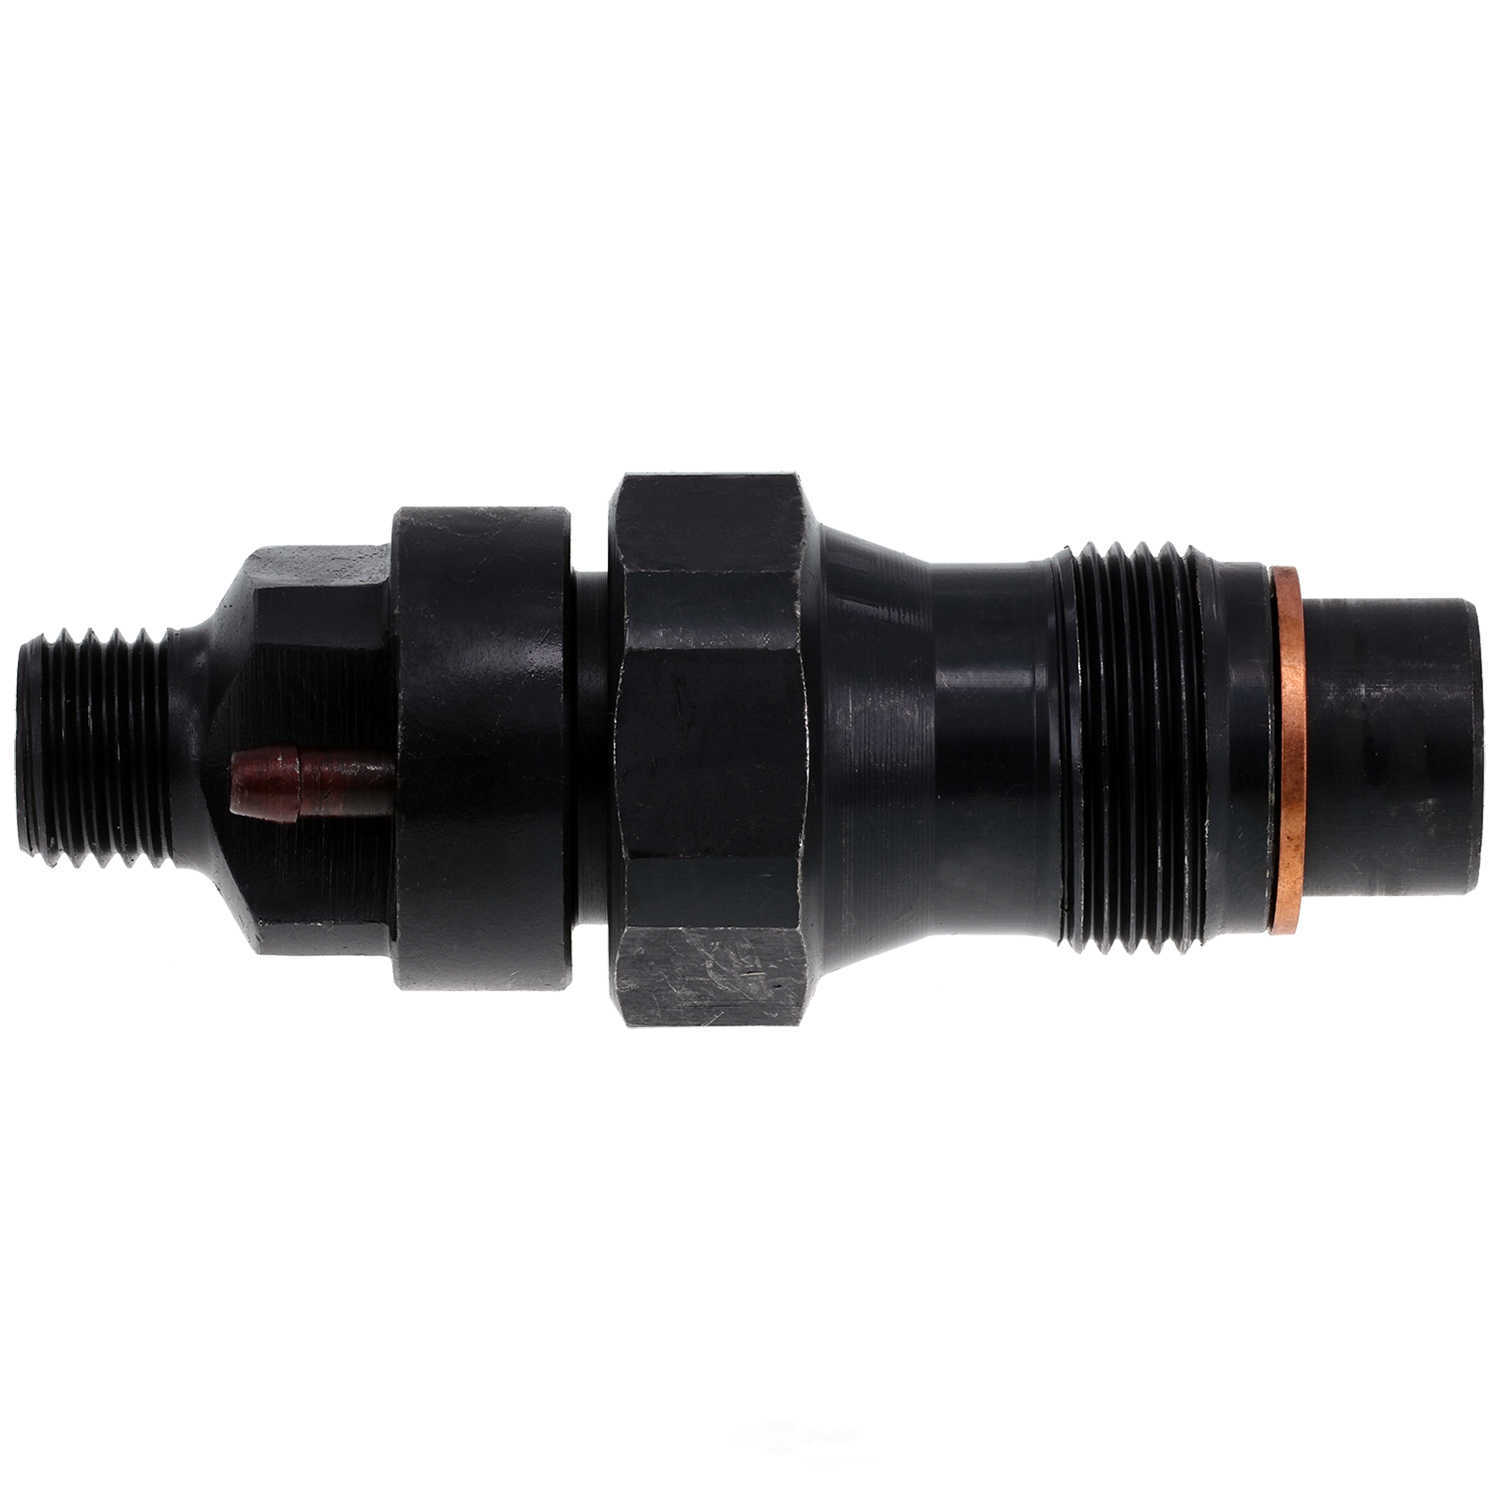 GB REMANUFACTURING INC. - New Diesel Fuel Injector - GBR 631-103